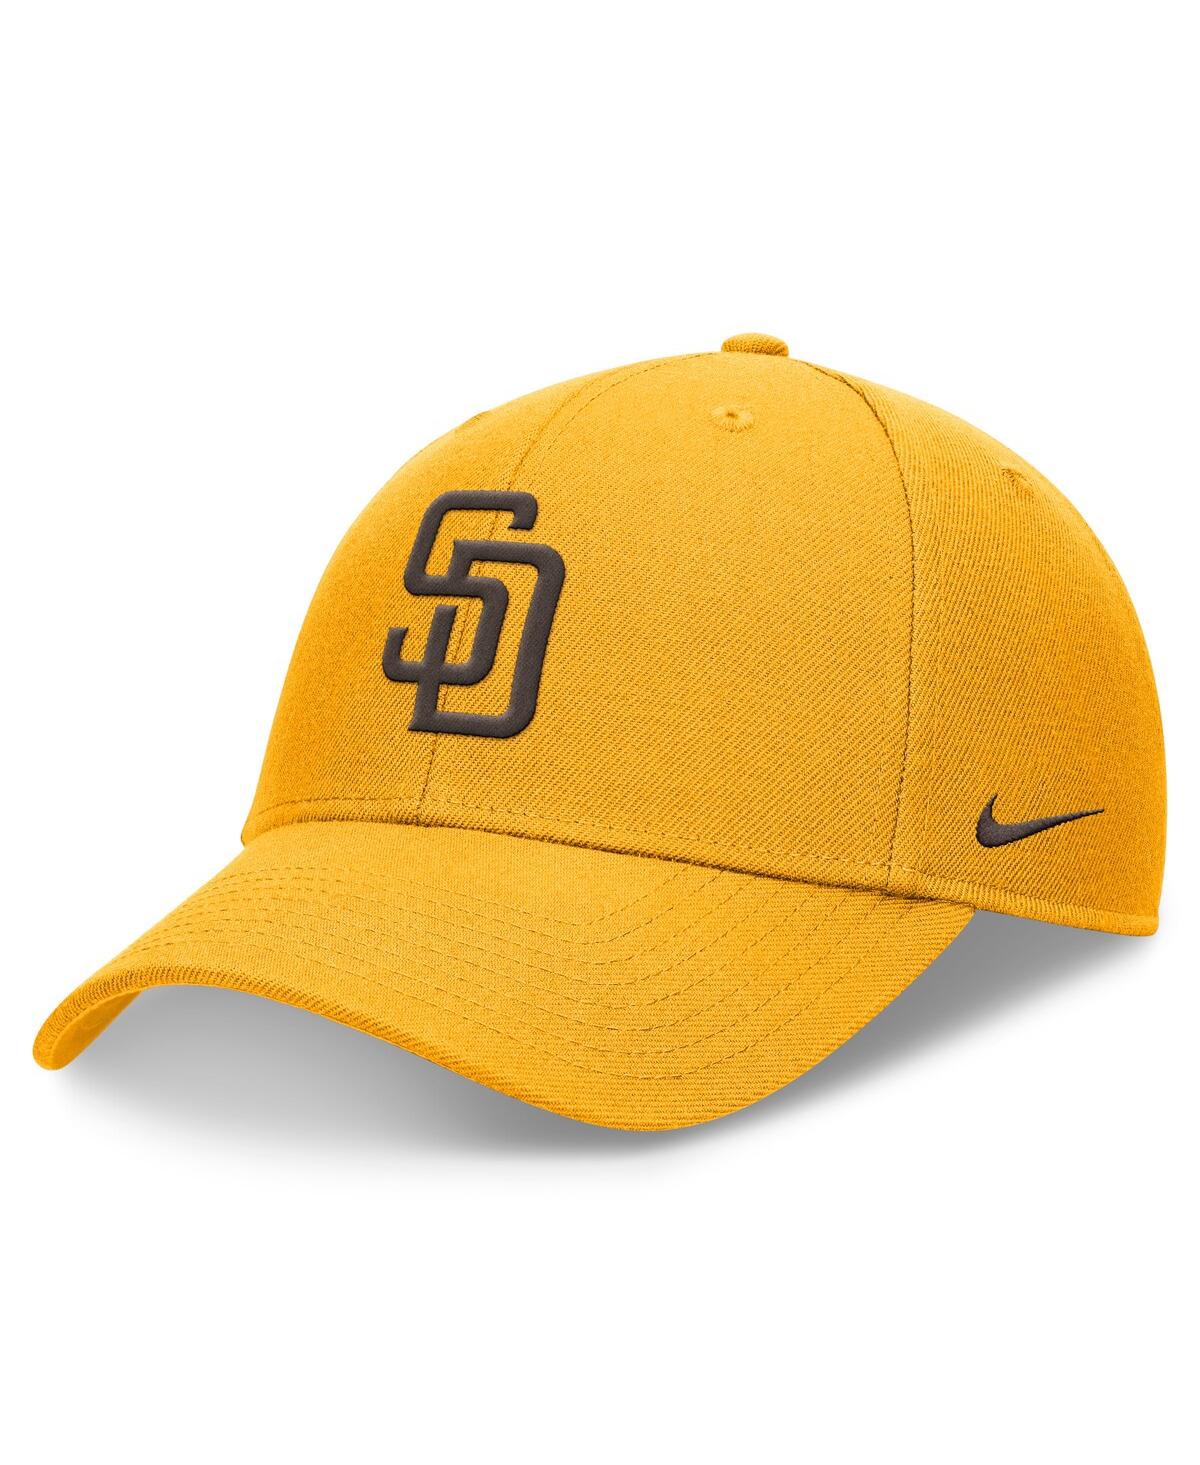 Men's Gold San Diego Padres Evergreen Club Performance Adjustable Hat - Gold